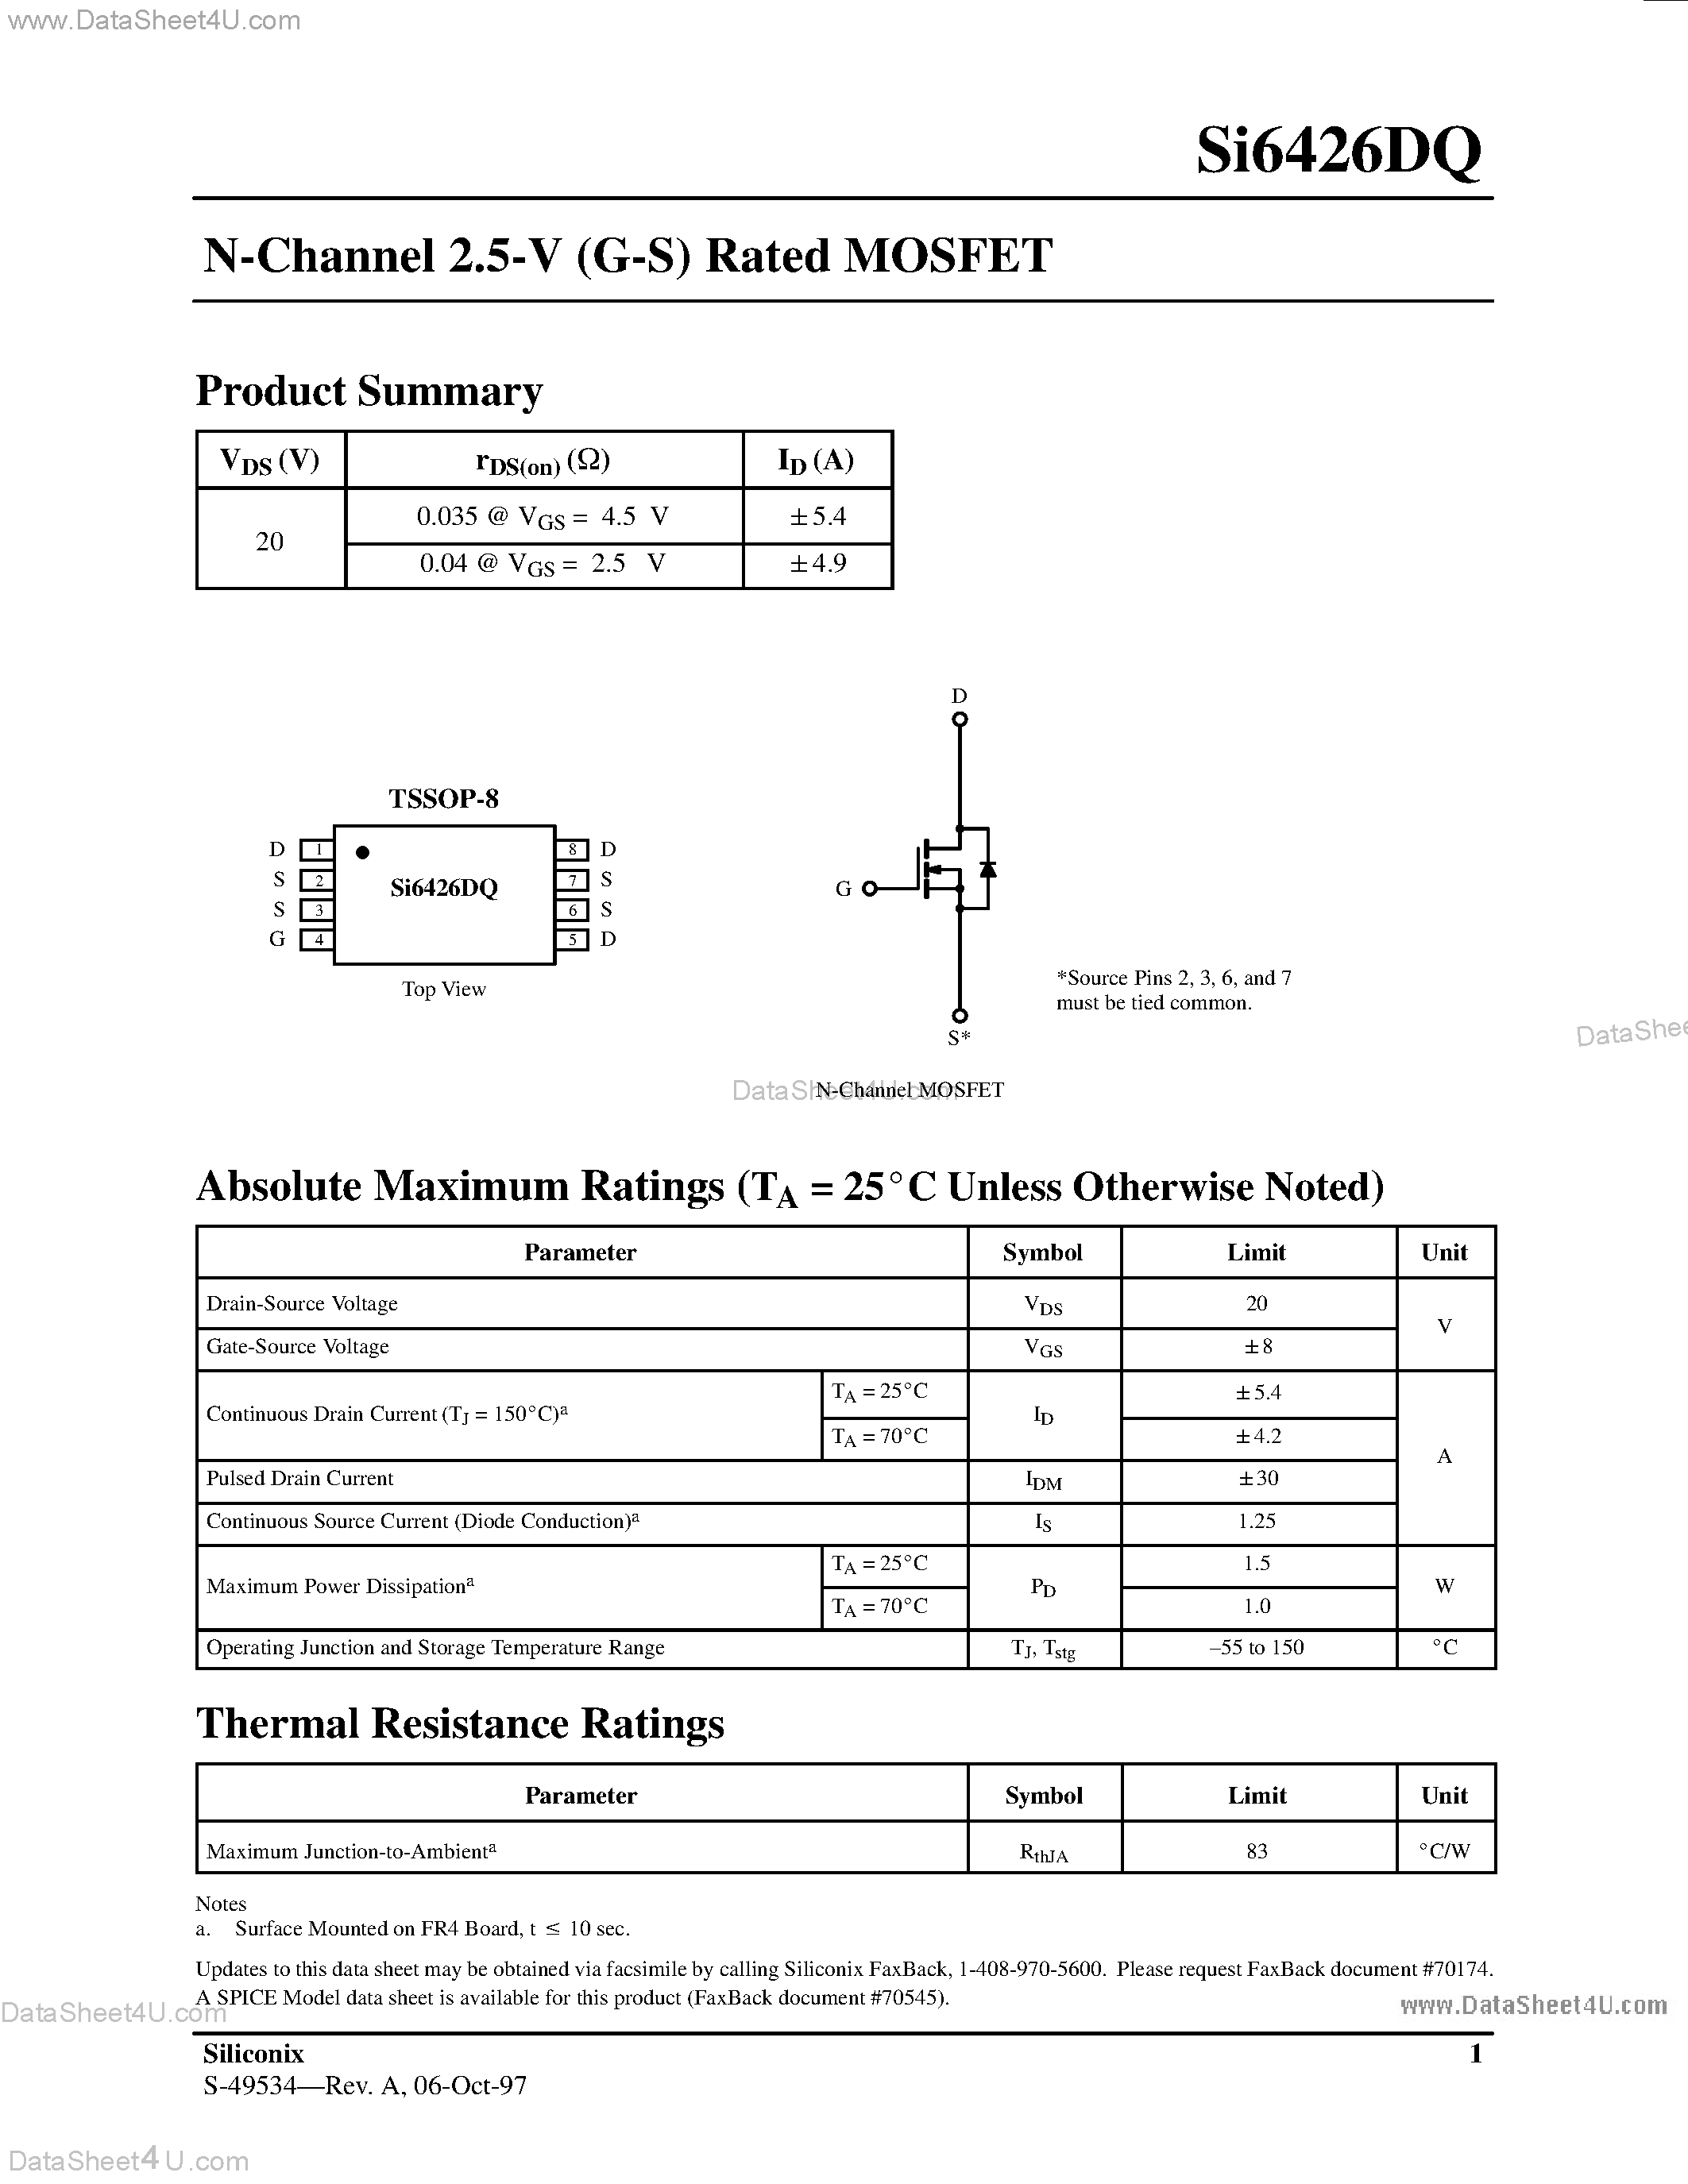 Даташит SI426DQ - N-Channel 2.5-V (G-S) Rated MOSFET страница 1